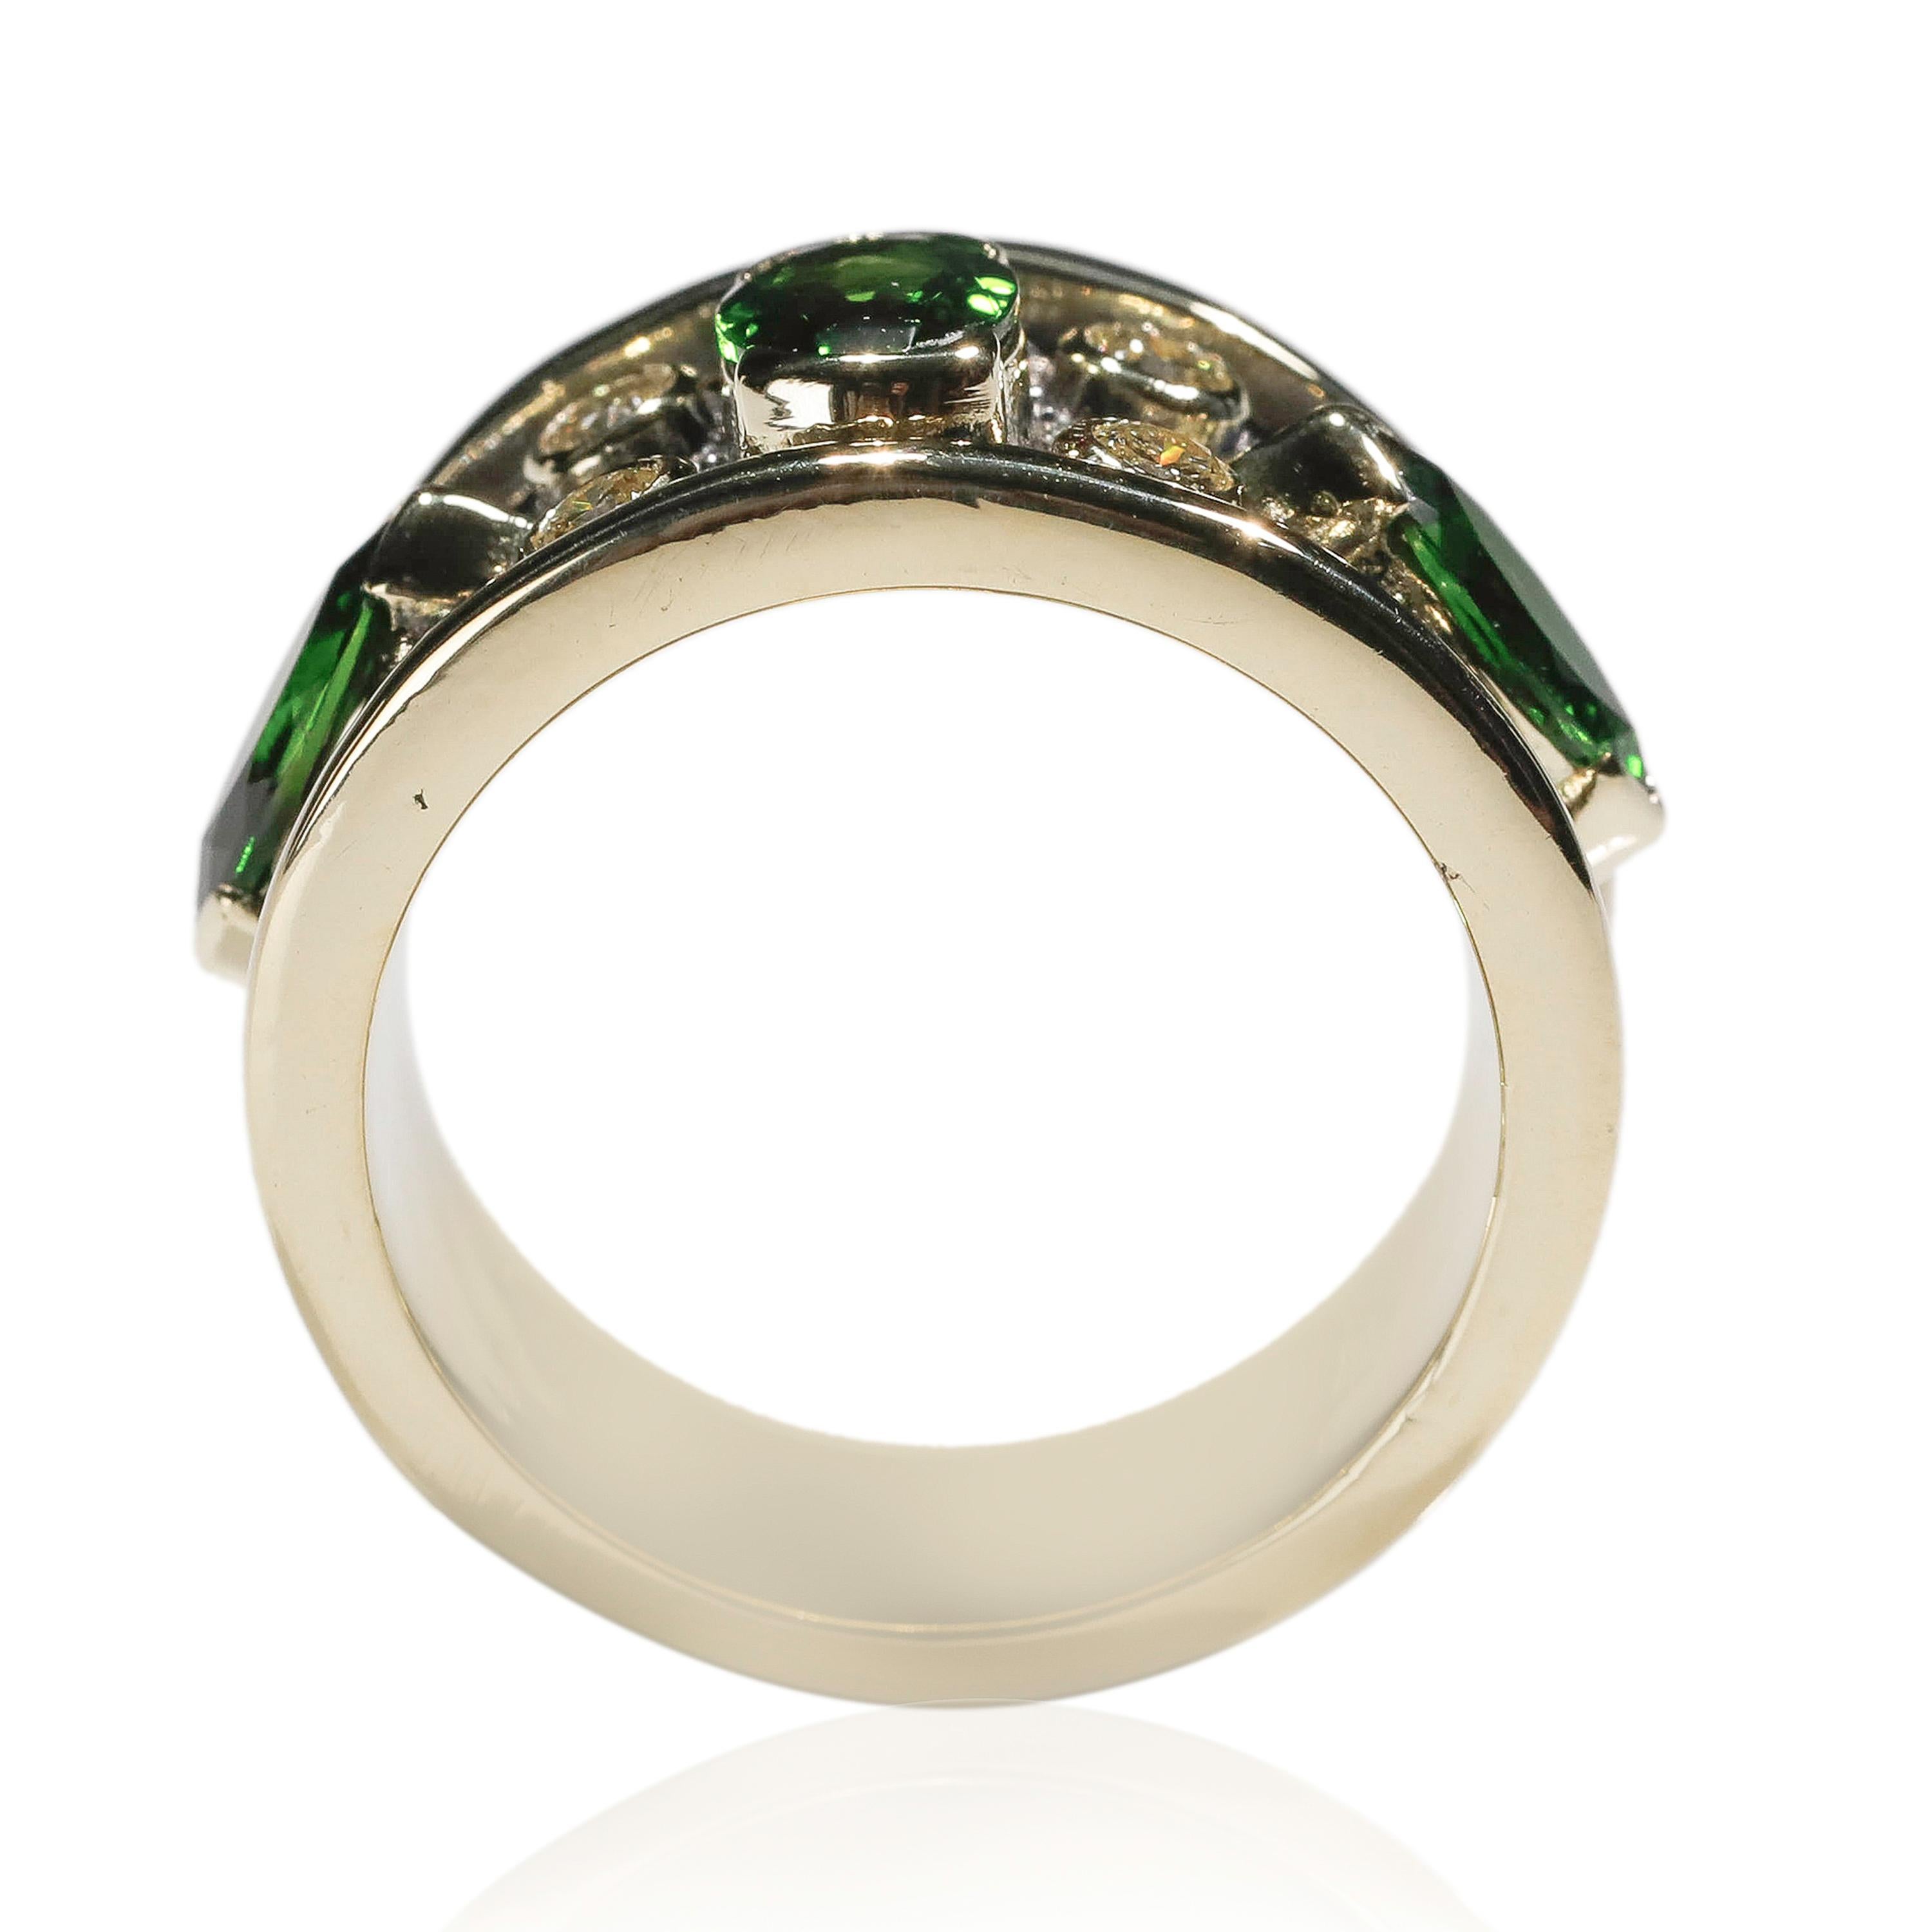 18kt Yellow Gold 2.5 Ct Chrome Diopside Tourmaline Diamond Band Ring US Size 8

Crafted in 18 kt Yellow Gold, this Unique design showcases a white Diamond 0.35 TCW Round-shaped diamonds, set in yellow gold, fine Oval, and marquise shape mesmerizing